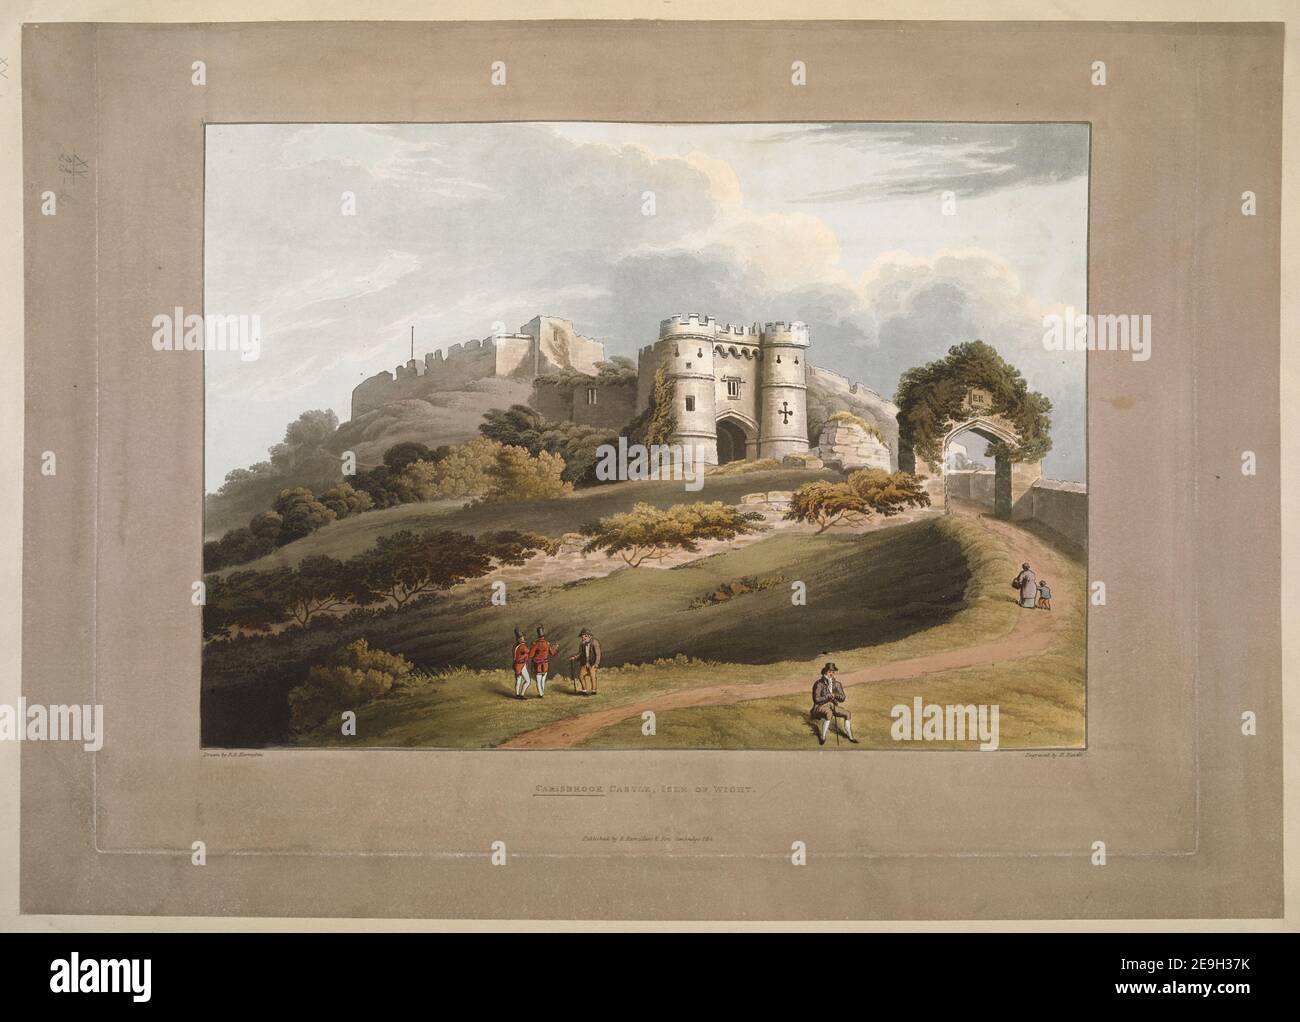 CARISBROOK CASTLE, ISLE OF WIGHT.  Author  Havell, Robert 15.23.k. Place of publication: [Cambridge] Publisher: Published by R. Harraden, Son Cambridge, Date of publication: 1814.  Item type: 1 print Medium: aquatint and etching with hand-colouring Dimensions: sheet 43 x 60.8 cm  Former owner: George III, King of Great Britain, 1738-1820 Stock Photo